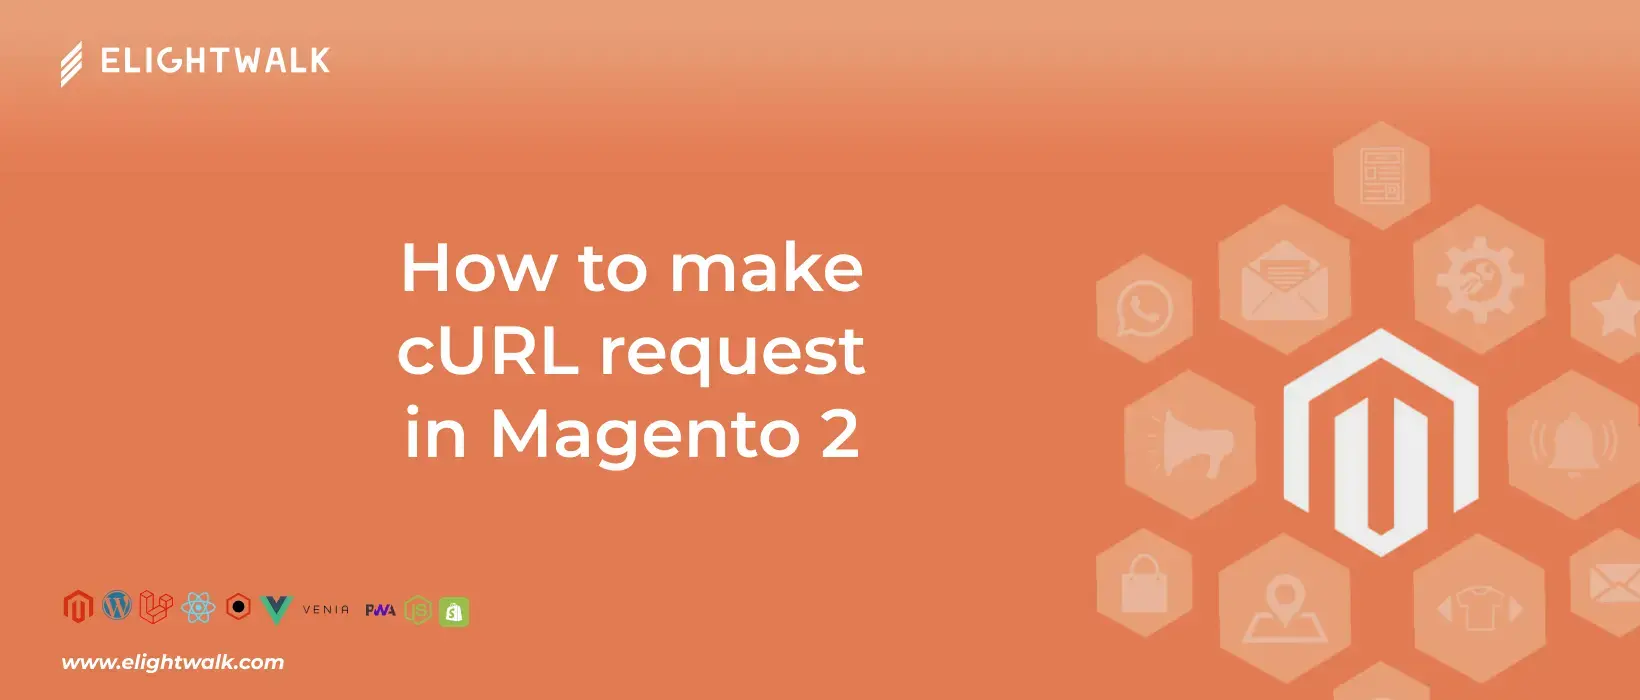 curl request in Magento 2